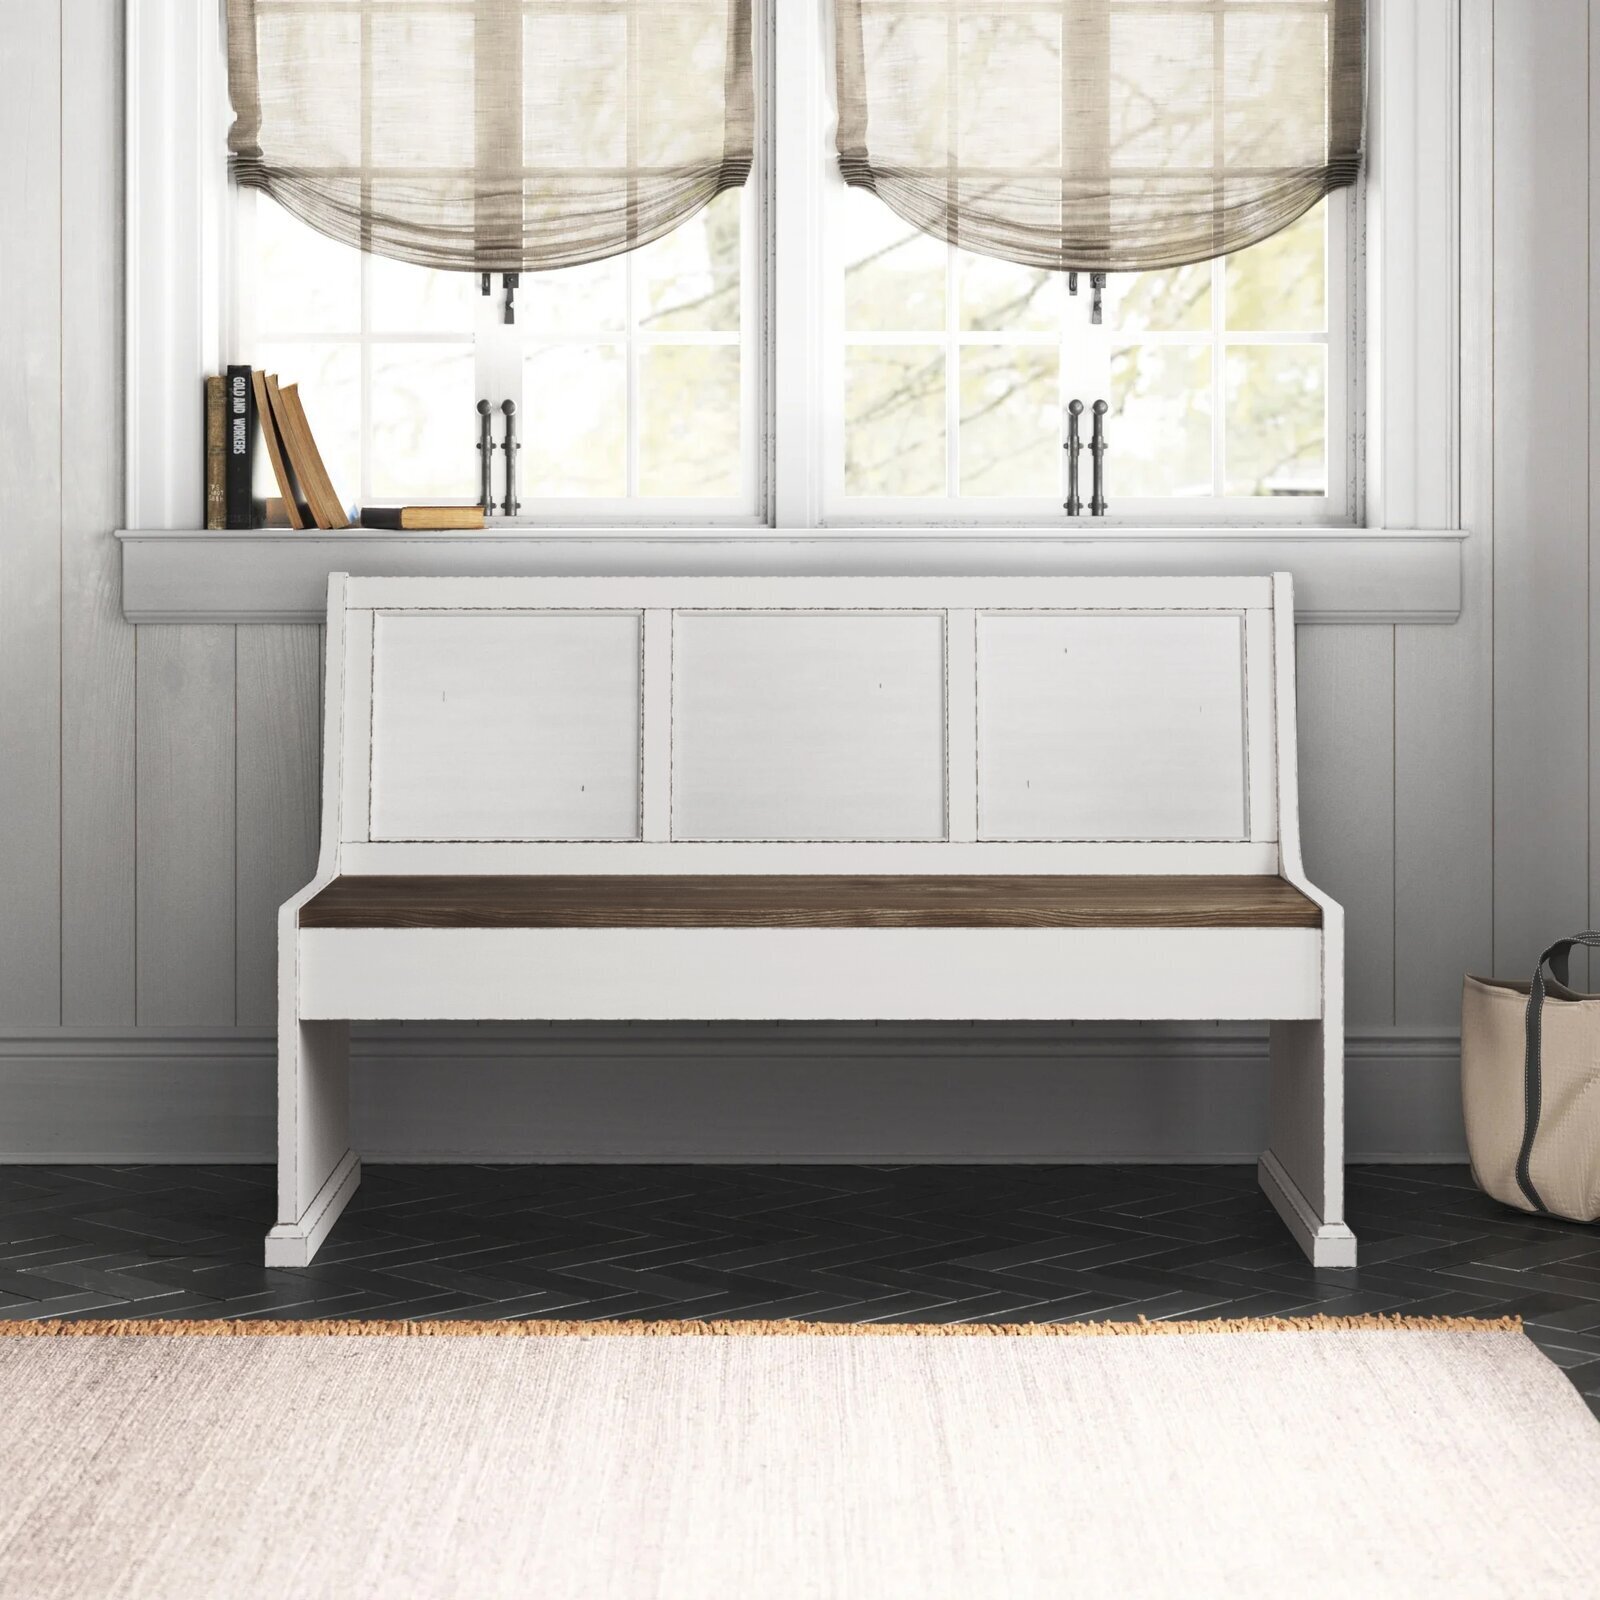 Wooden high back banquette bench